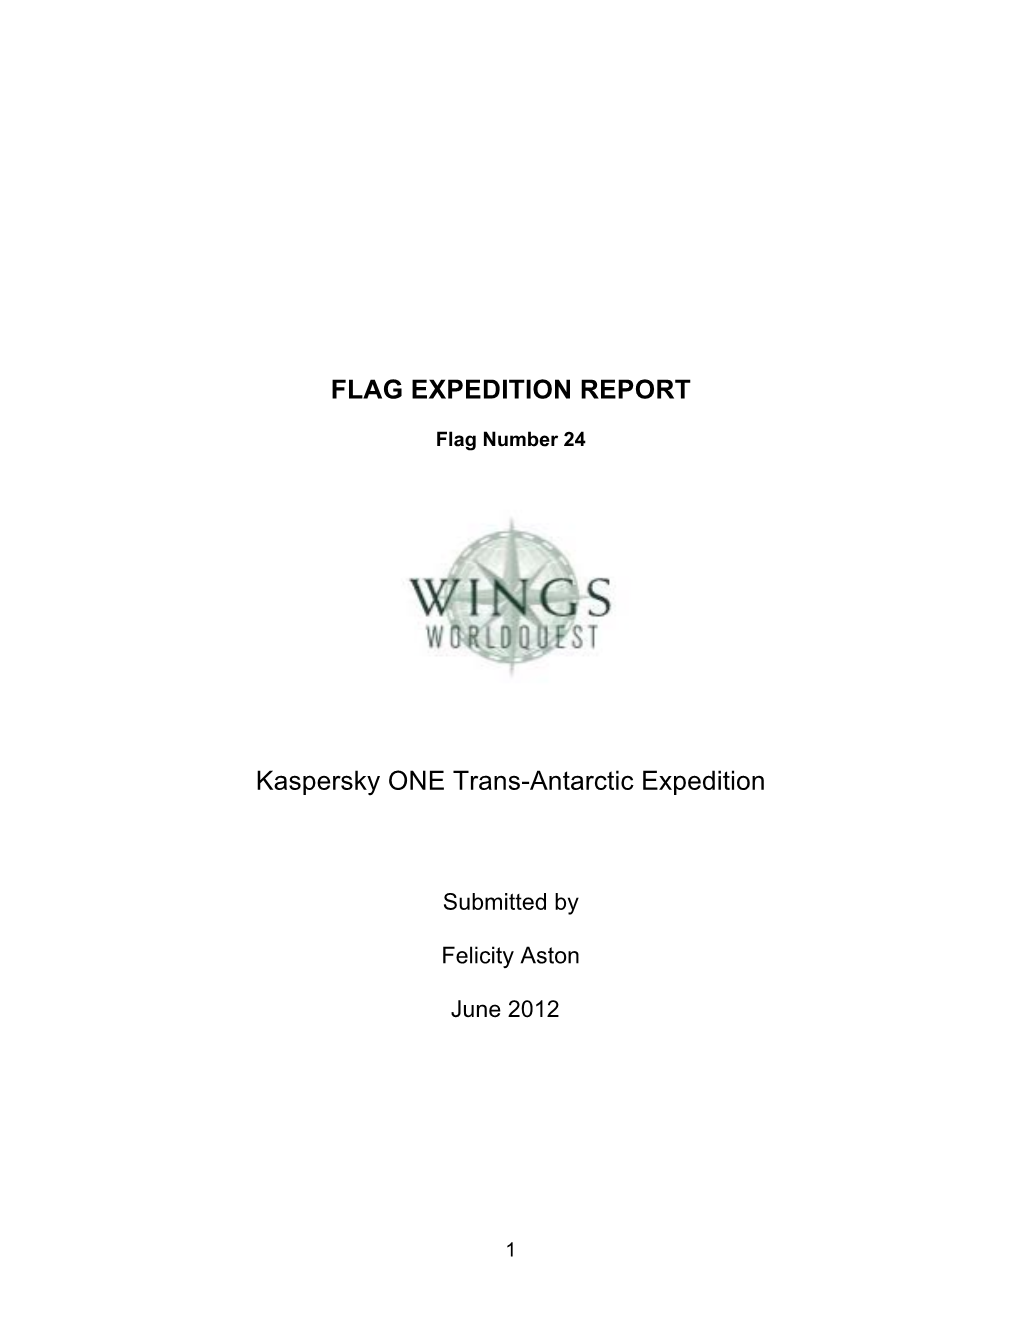 FLAG EXPEDITION REPORT Kaspersky ONE Trans-Antarctic